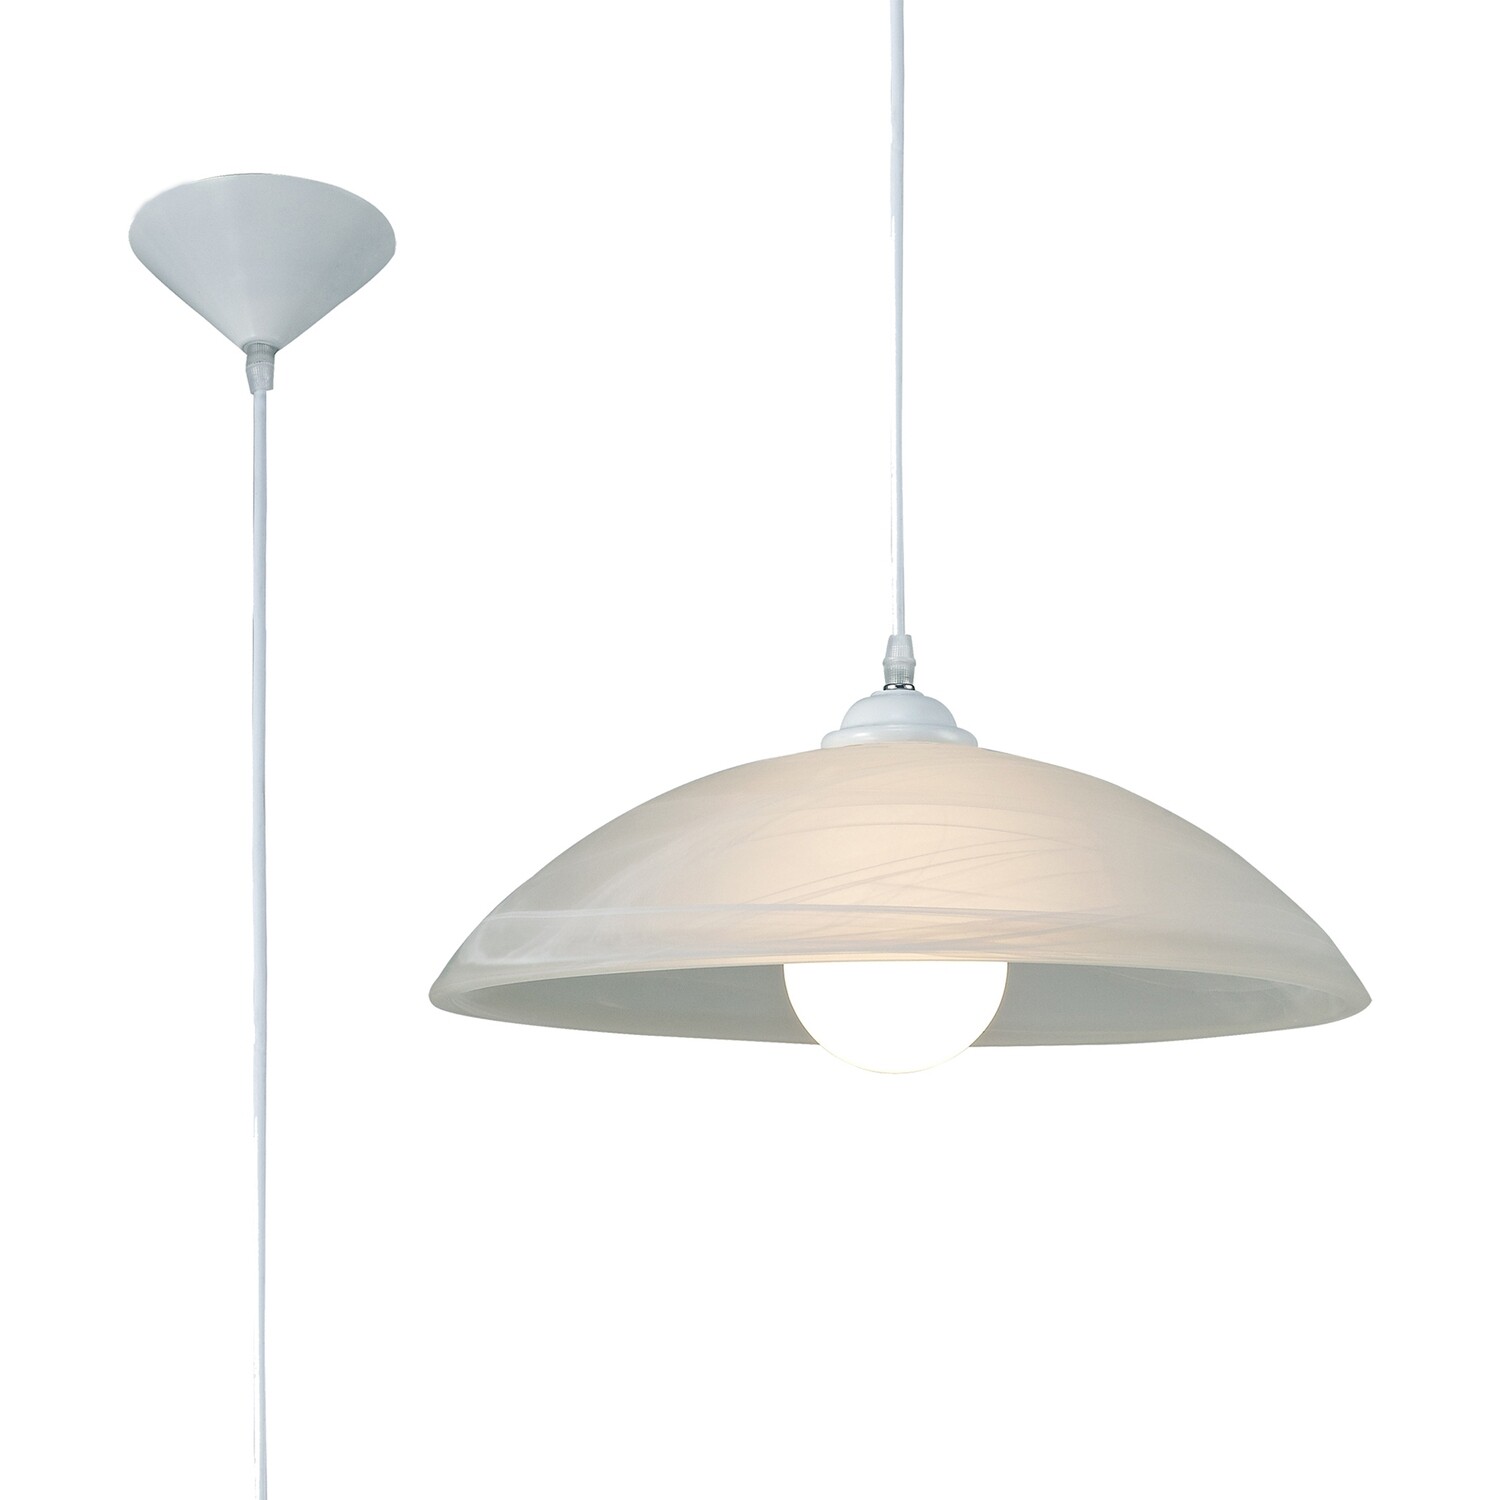 Chester 1 Light E27 Pendant, Frosted Alabaster Glass With White Suspension Kit